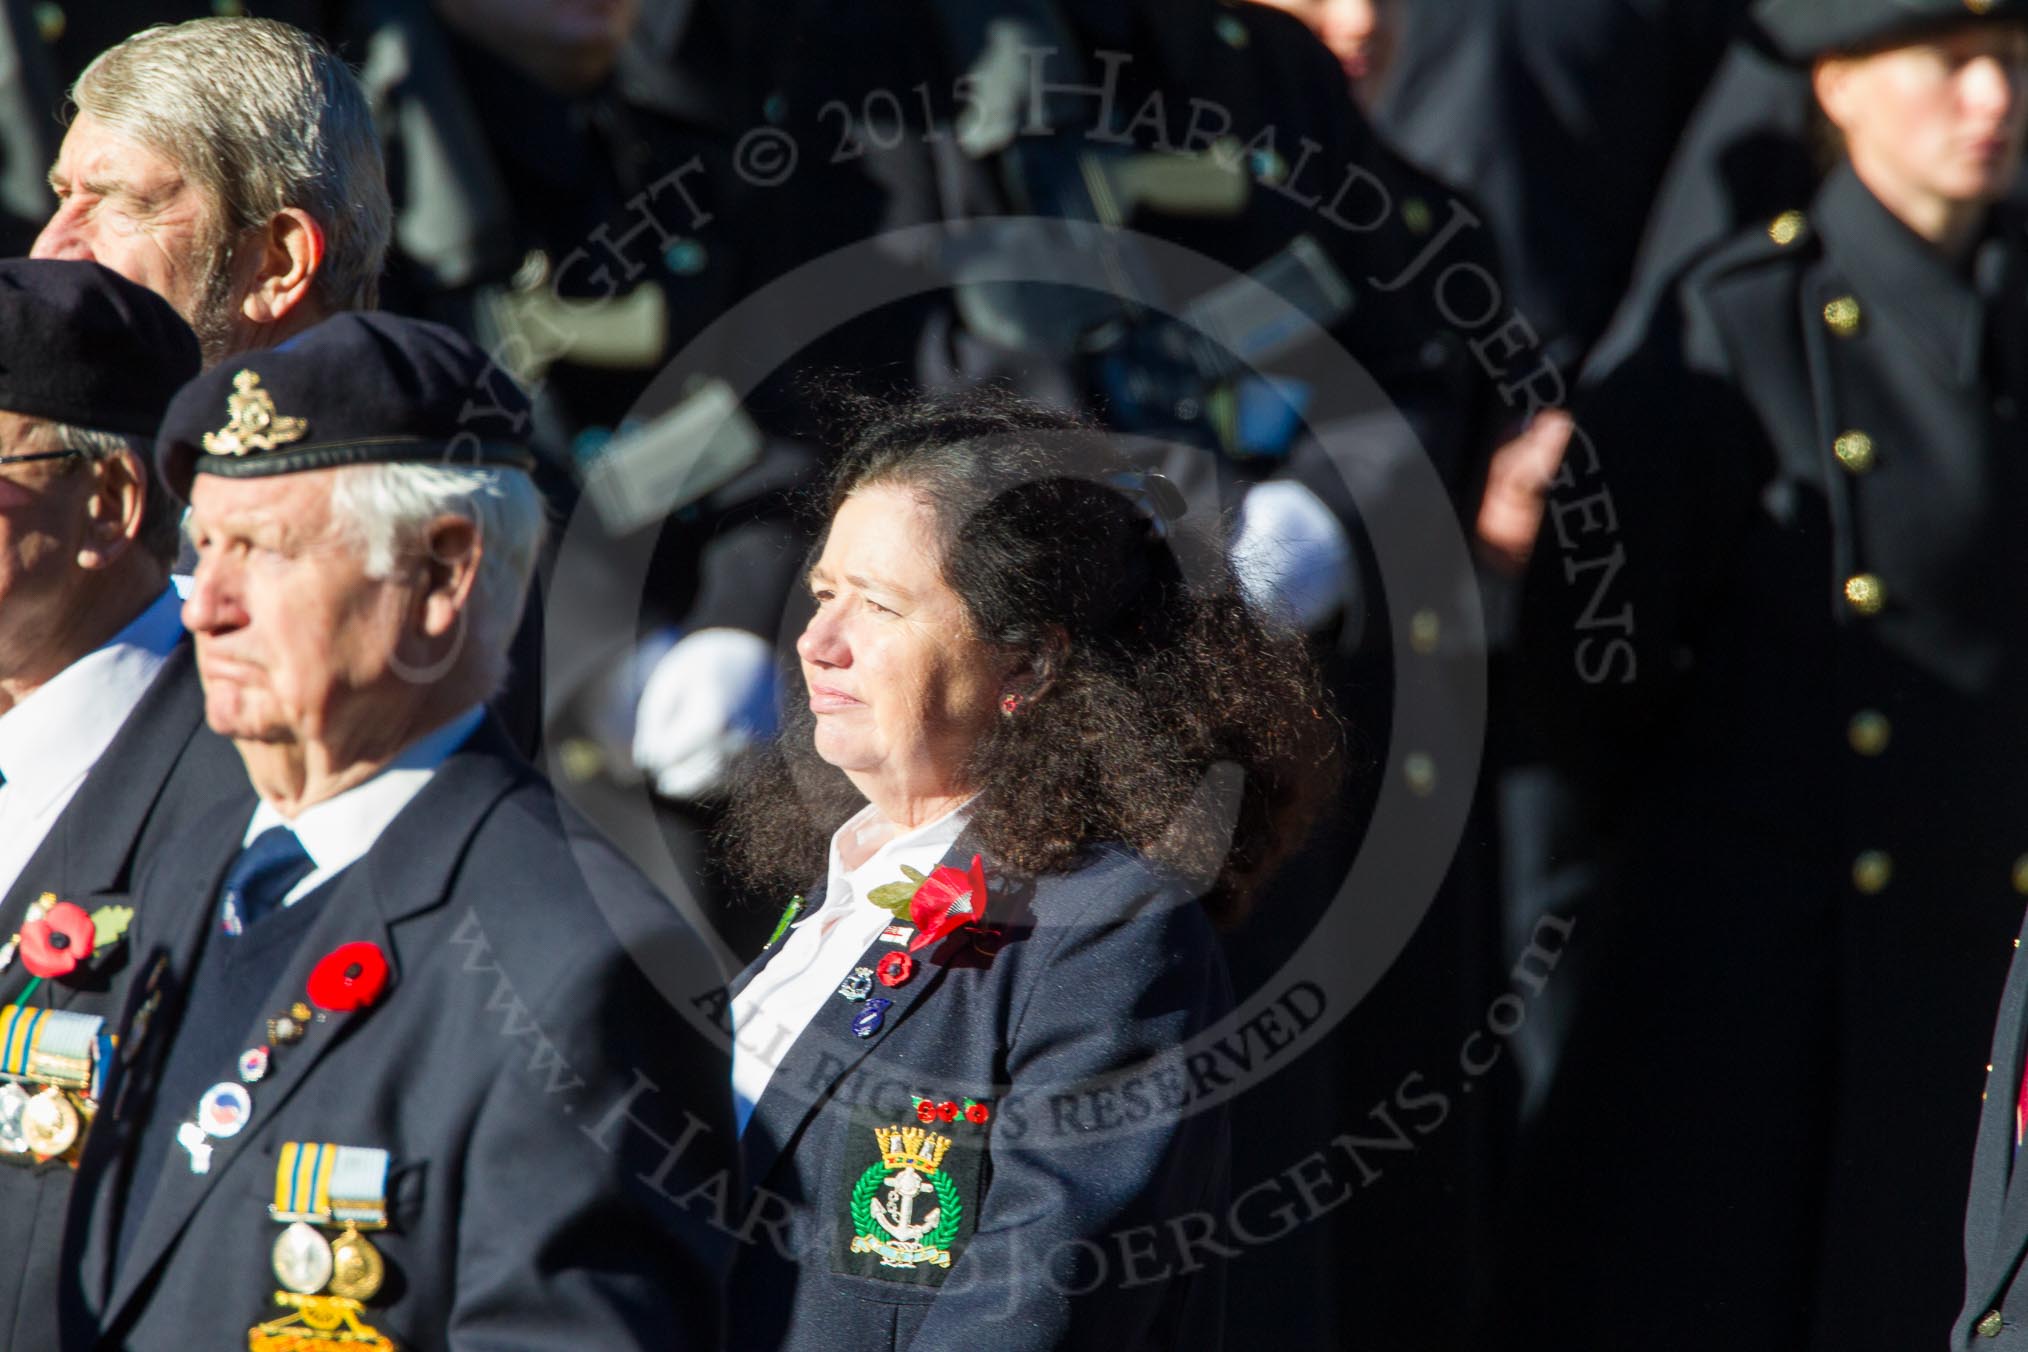 Remembrance Sunday Cenotaph March Past 2013: E41 - Broadsword Association..
Press stand opposite the Foreign Office building, Whitehall, London SW1,
London,
Greater London,
United Kingdom,
on 10 November 2013 at 11:49, image #731